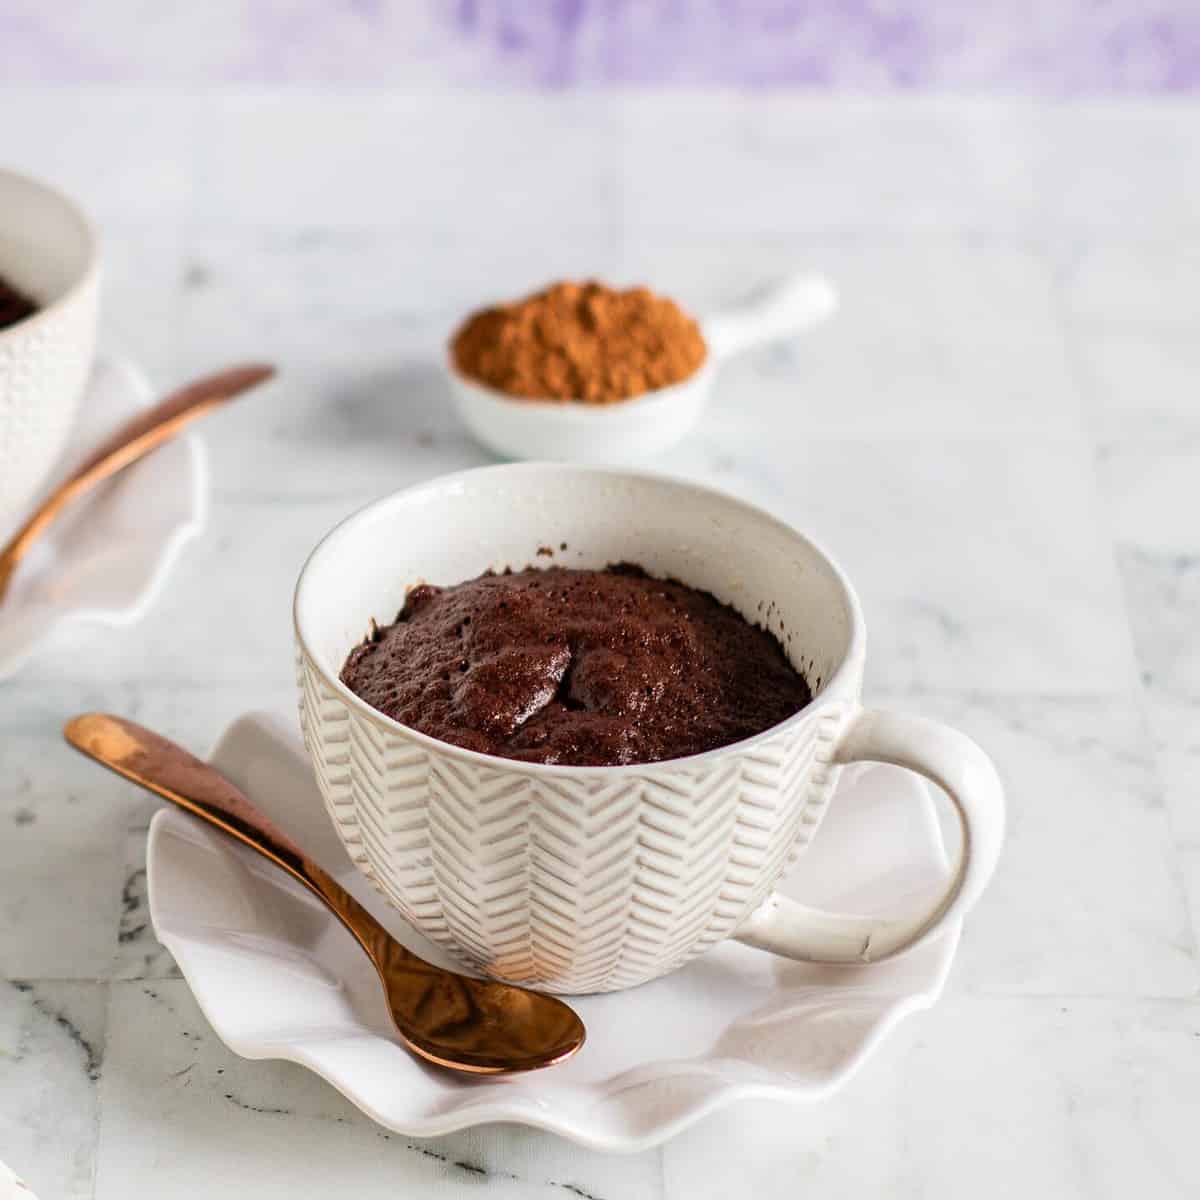  Indulge in a quick and easy chocolatey treat!